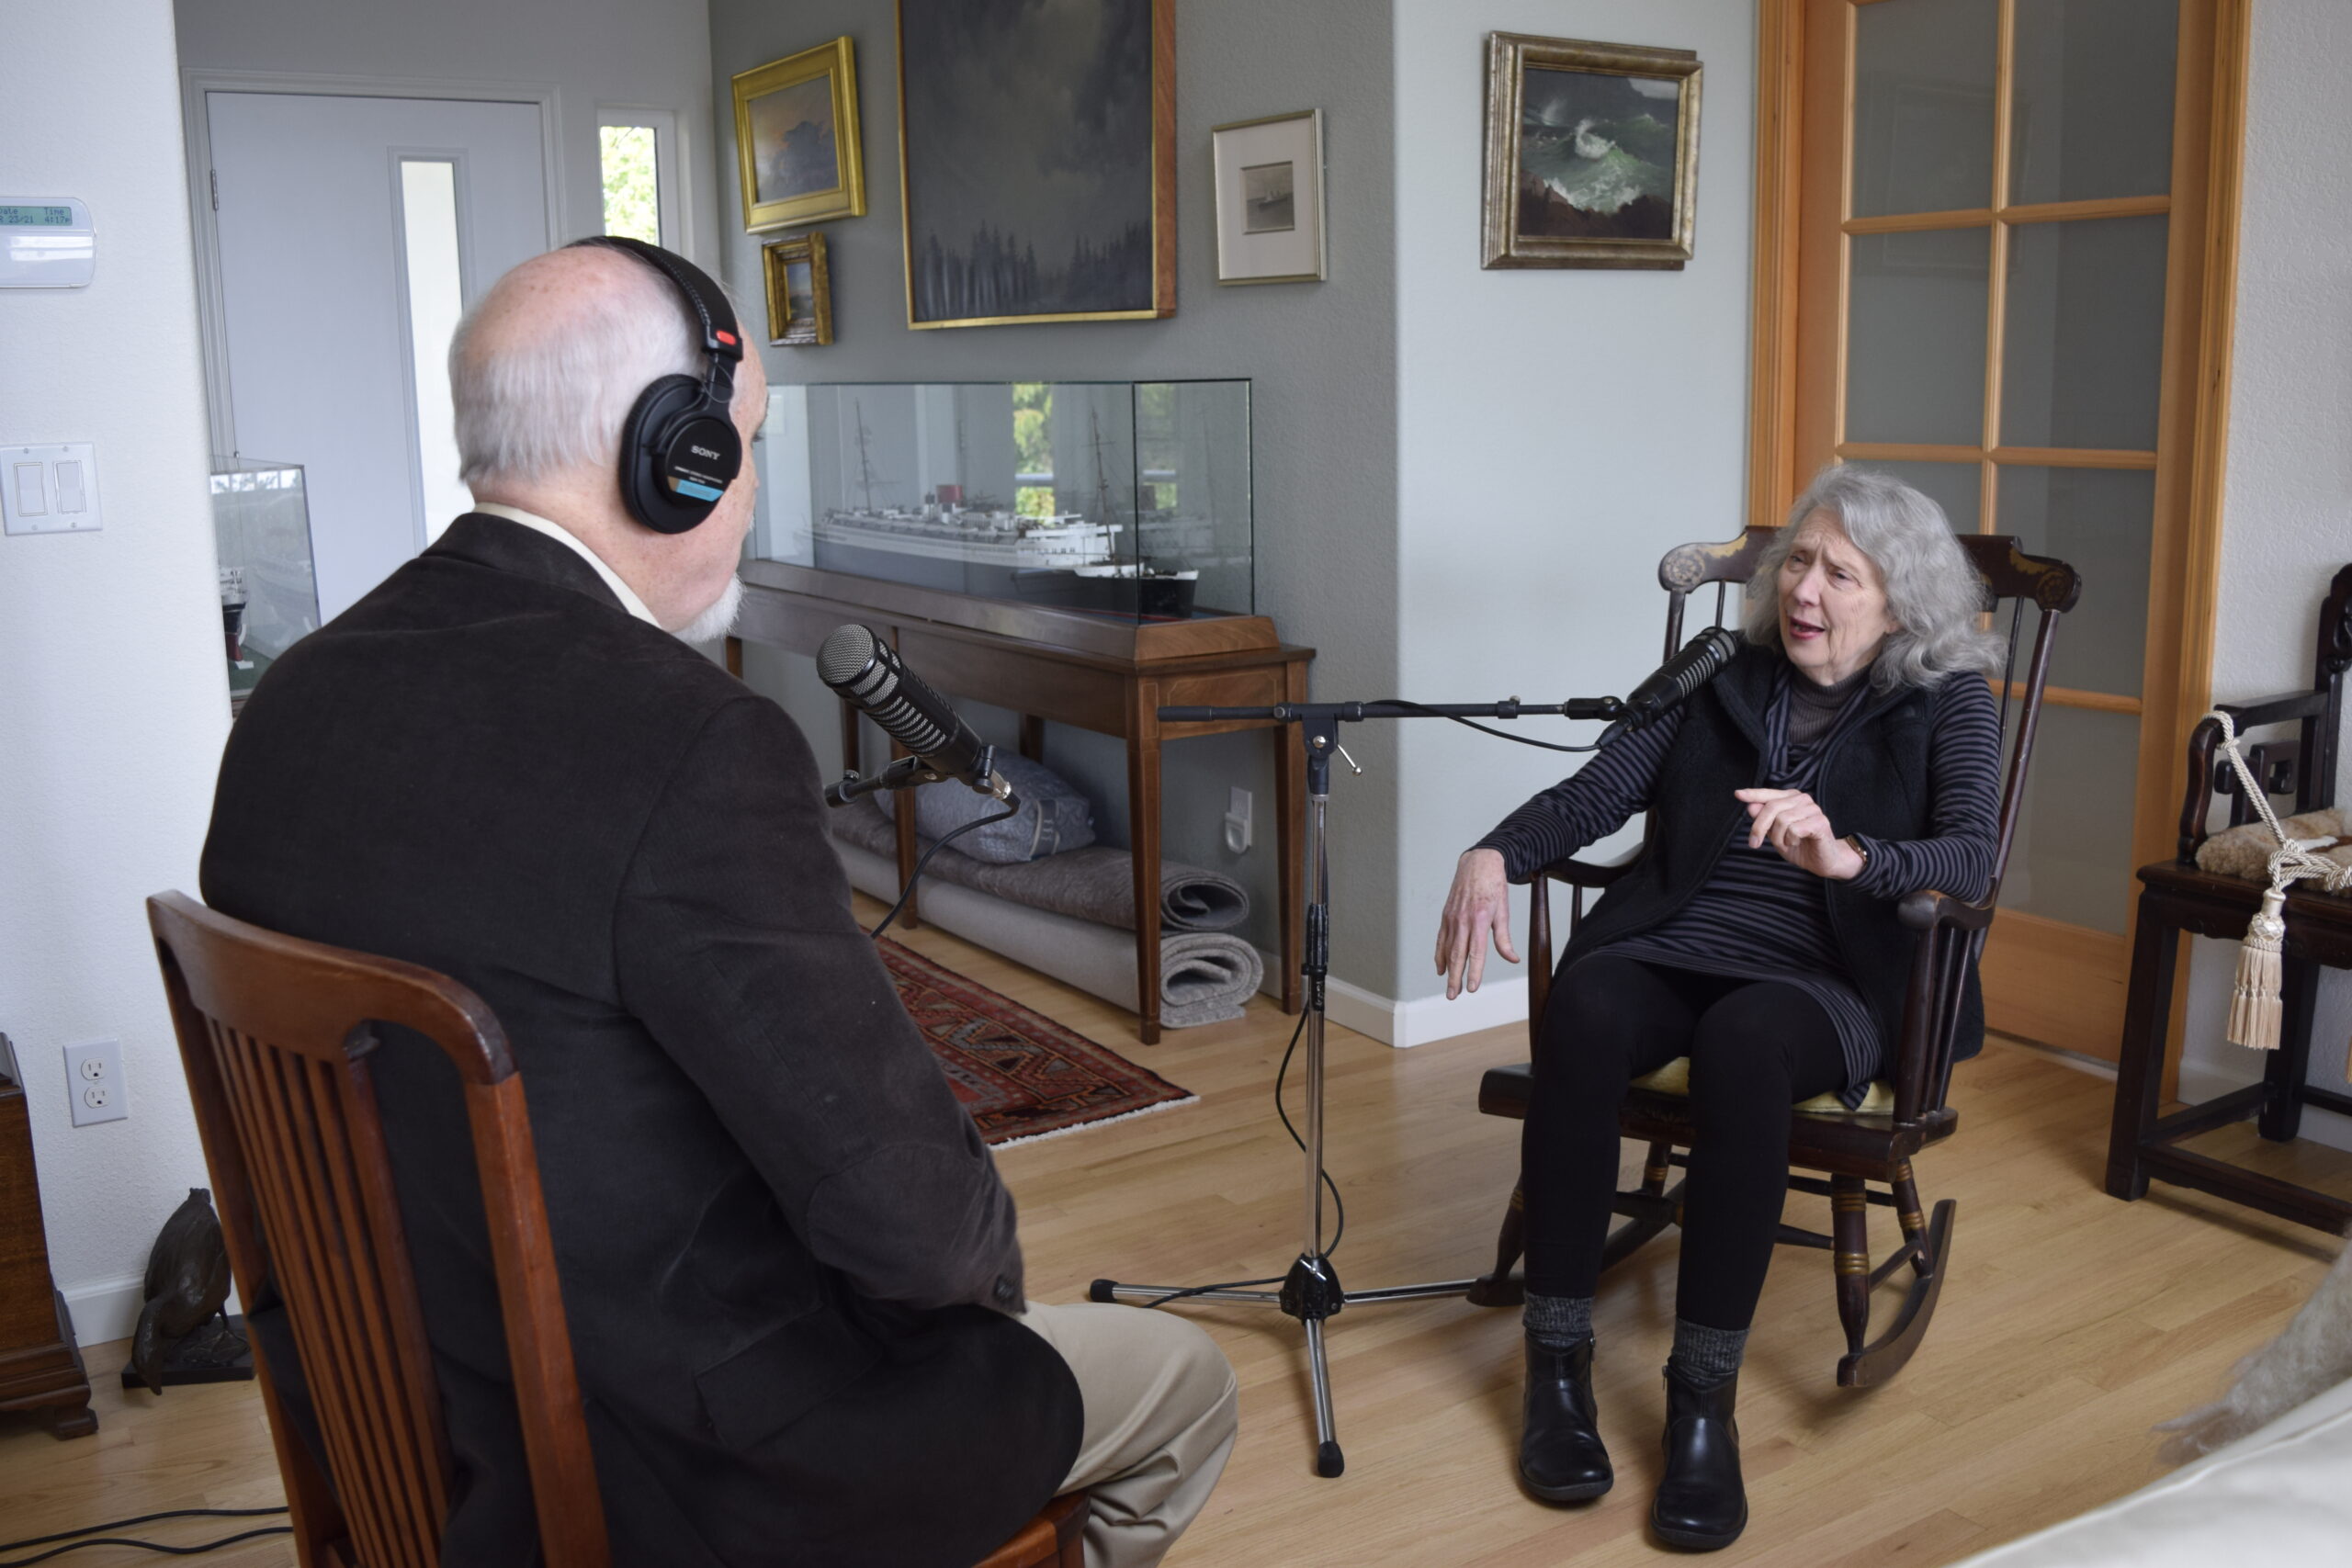 Joe McHugh interviews for the American Family Story Podcast